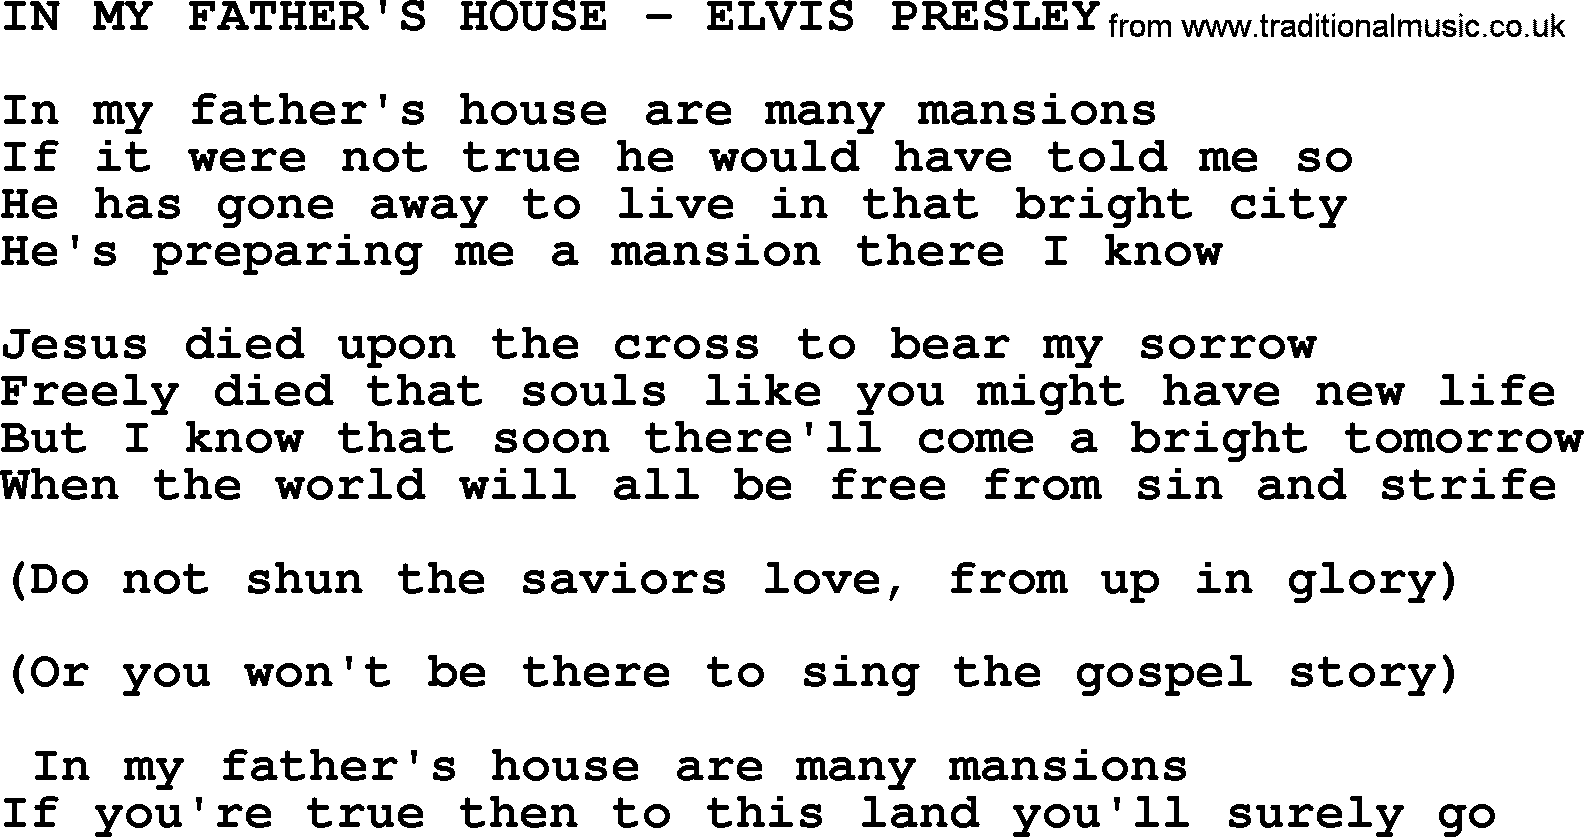 Elvis Presley song: In My Father's House-Elvis Presley-.txt lyrics and chords